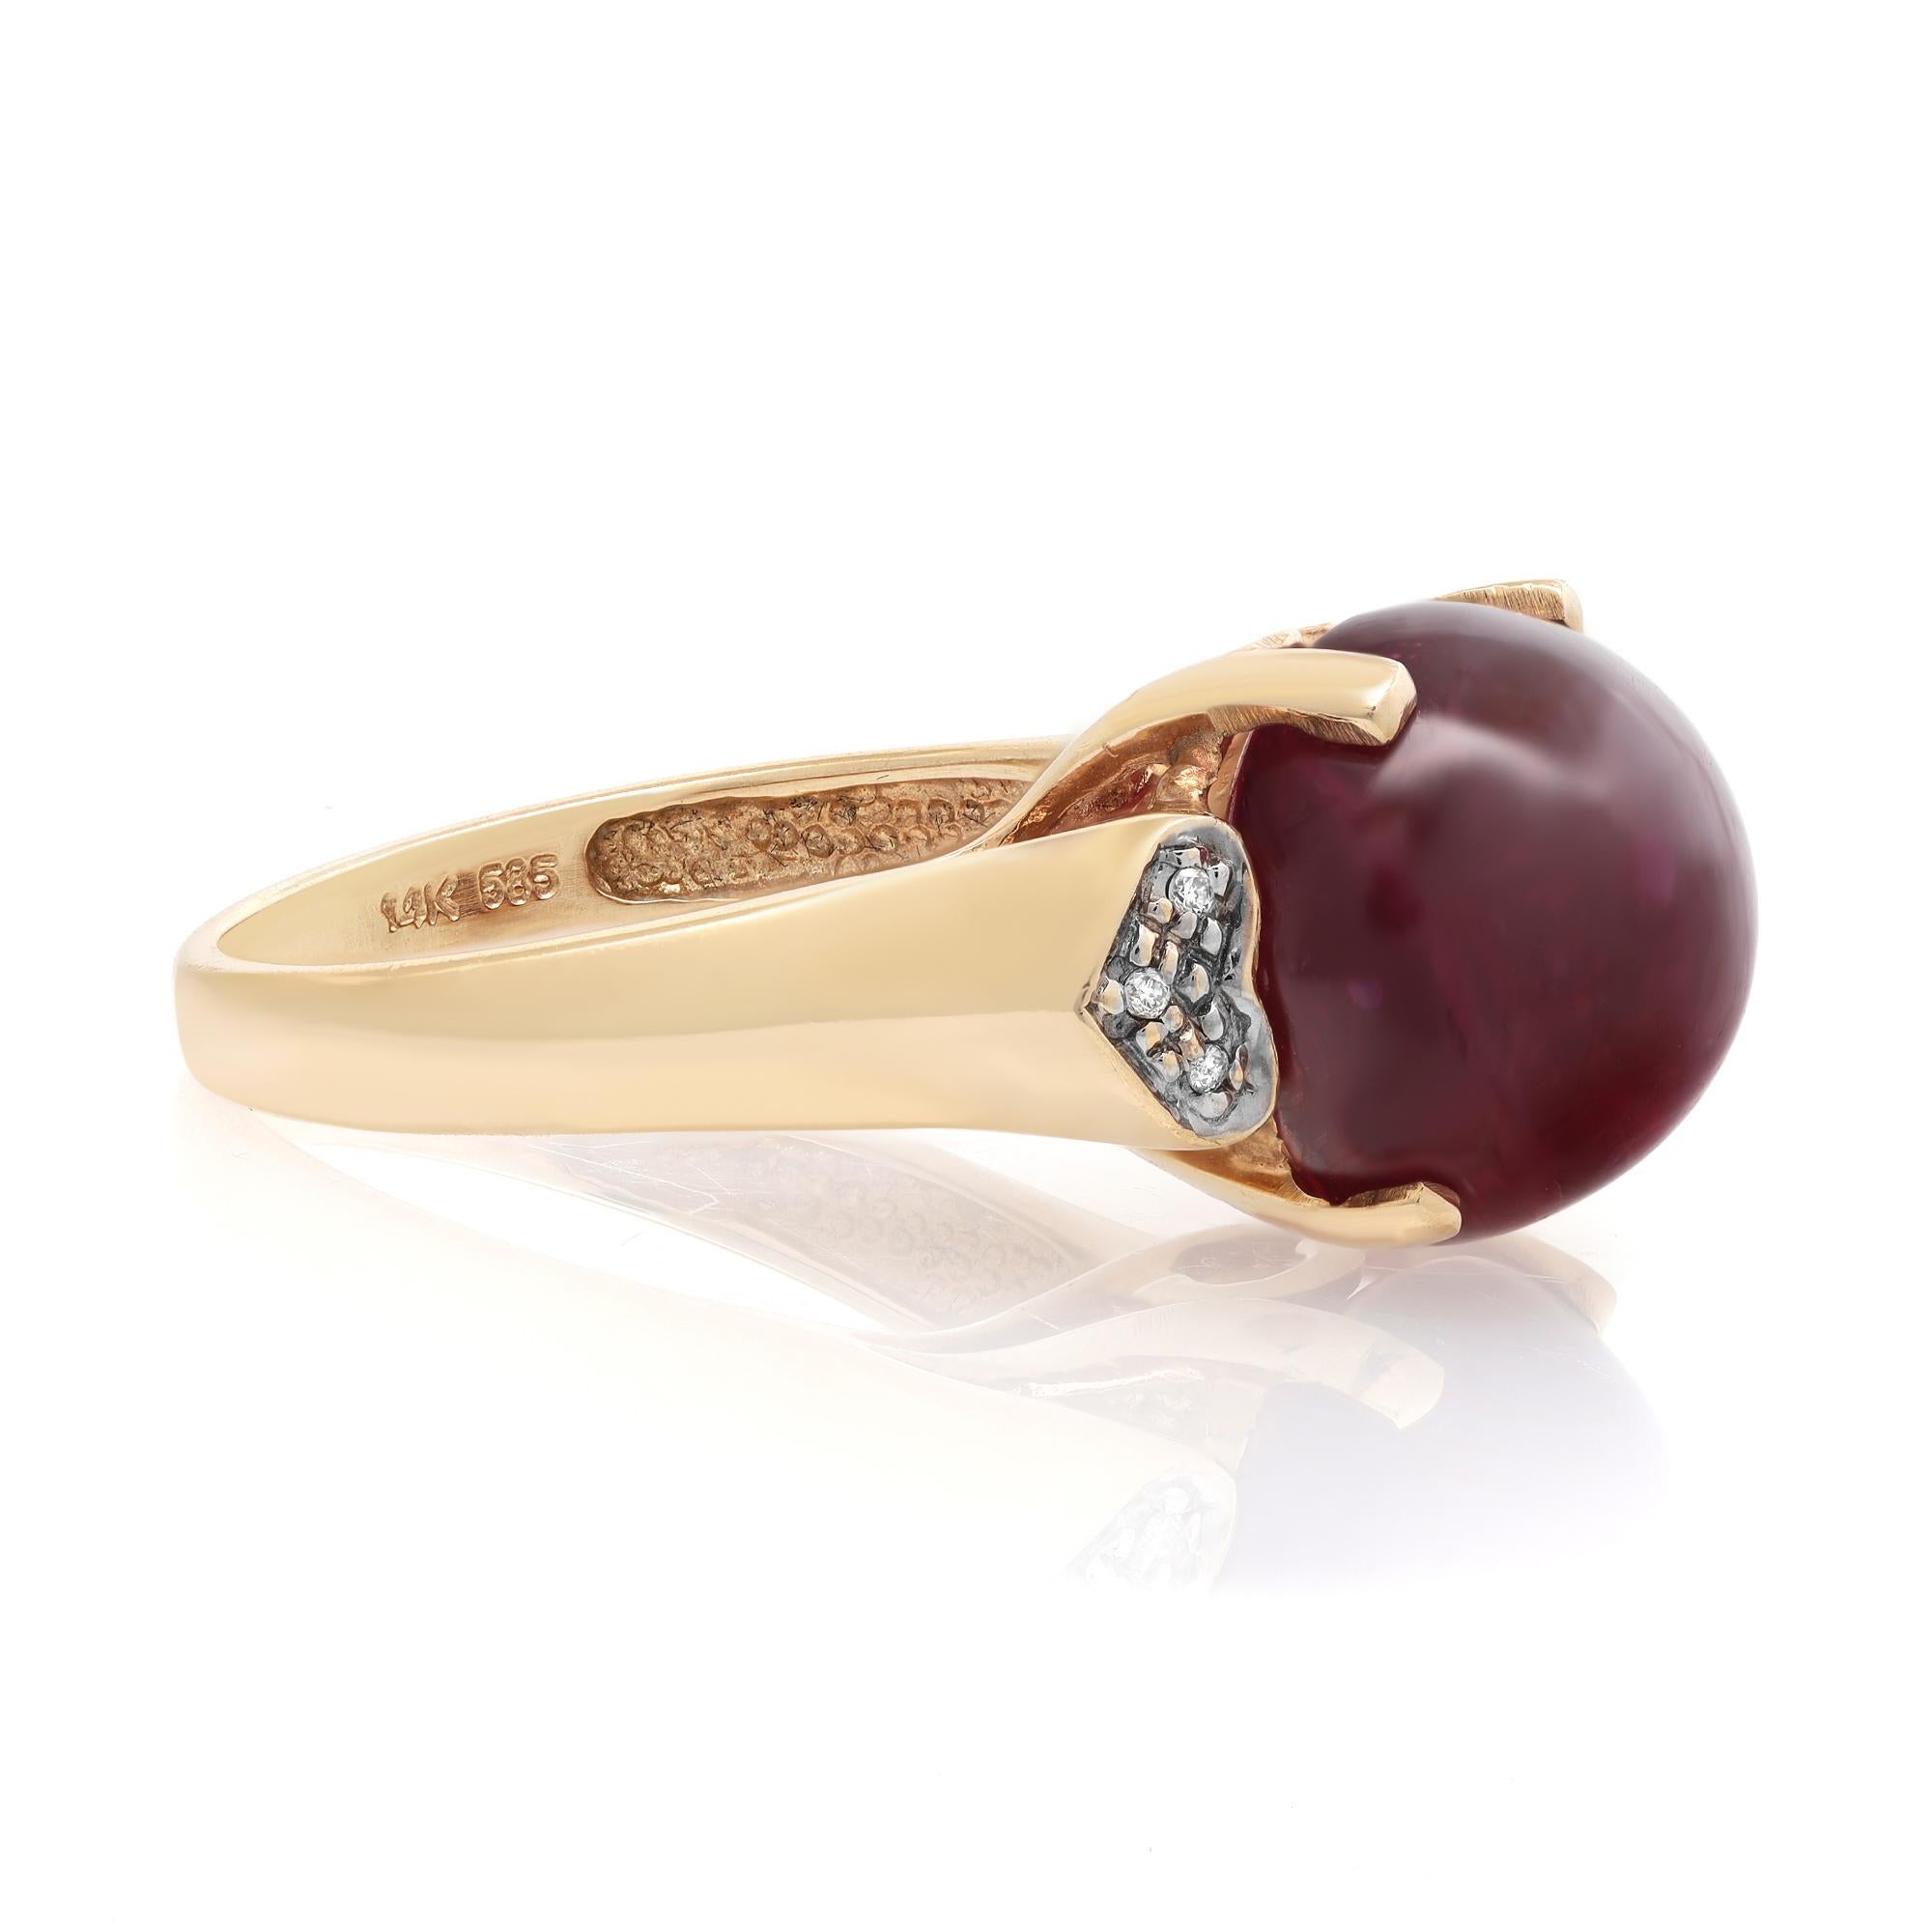 This beautiful Ruby and diamond ladies ring is crafted in fine 14k yellow gold. An excellent prong set round cabochon ruby weighing 15.30 carats is flanked as a center stone with tiny round cut diamonds in a heart shank weighing 0.04 carat. Ring